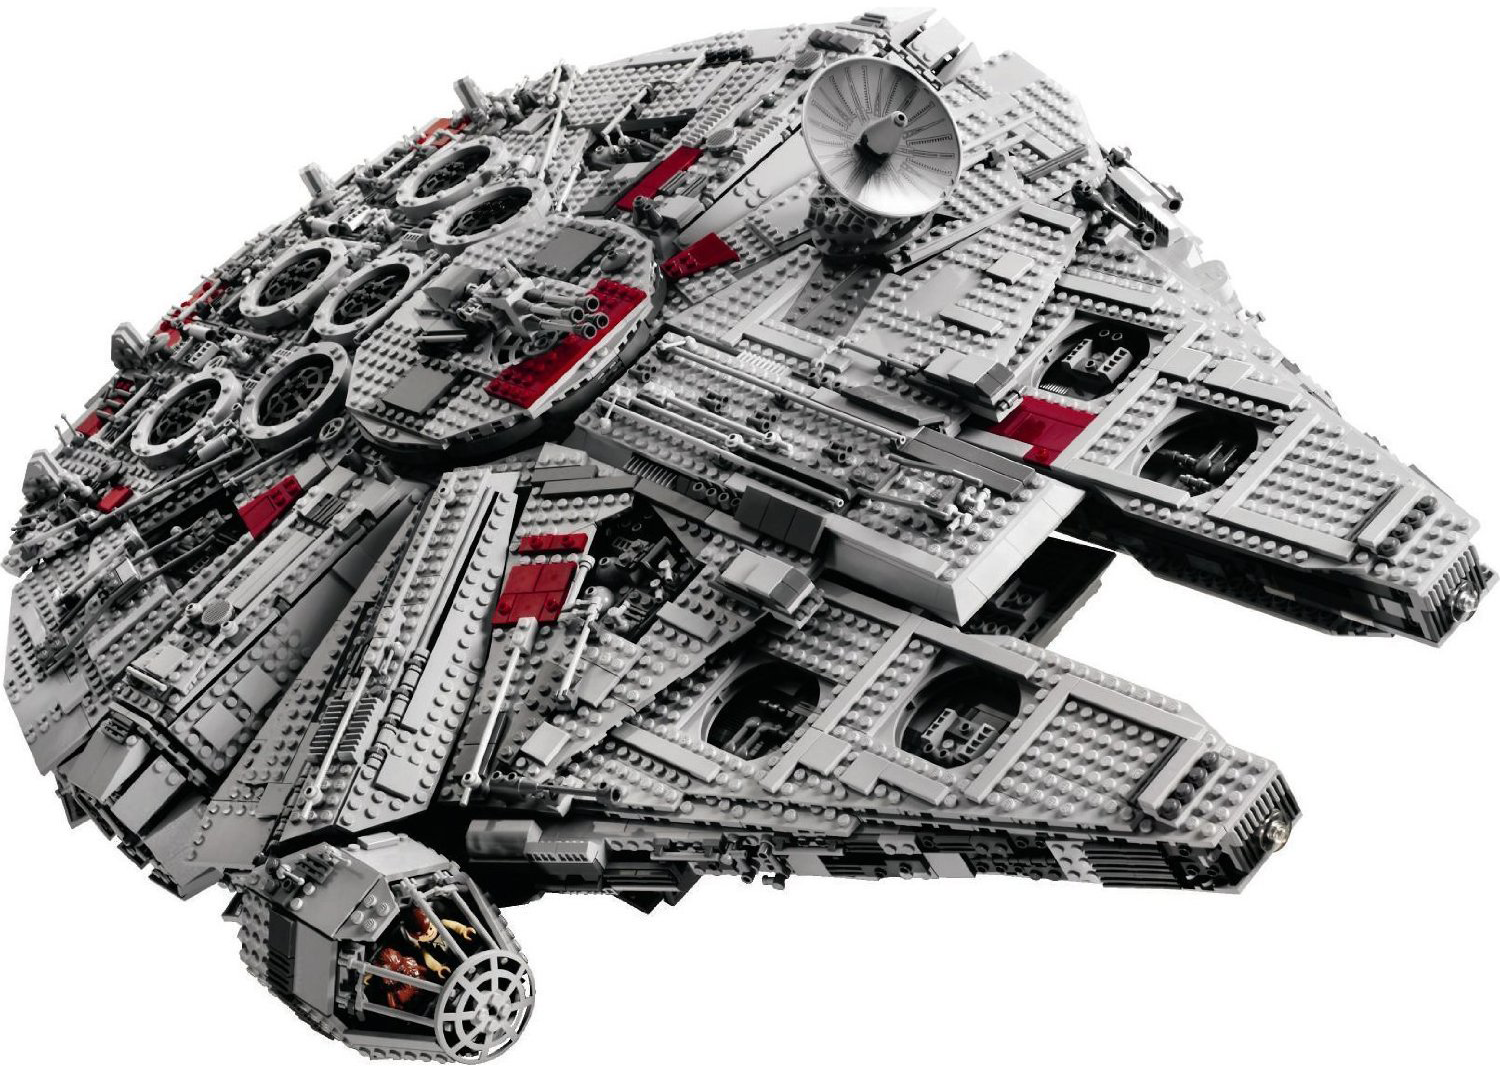 Witness the birth of a Lego Millennium Falcon   CNET